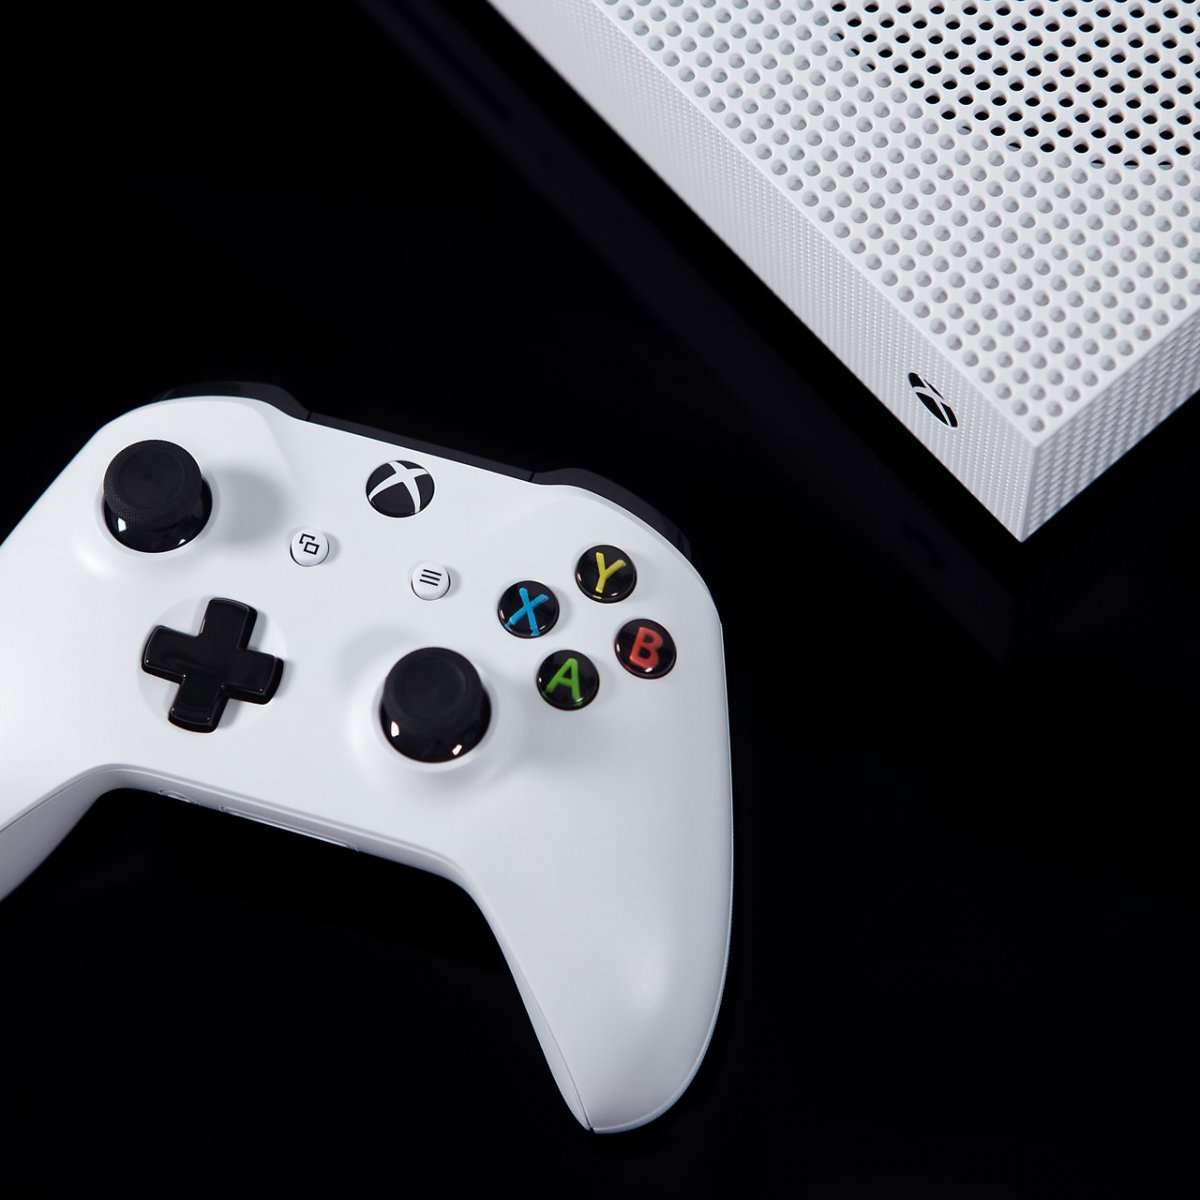 Ham Rechtsaf Academie Is your Xbox One S not Turning On or Off? [FIXED]